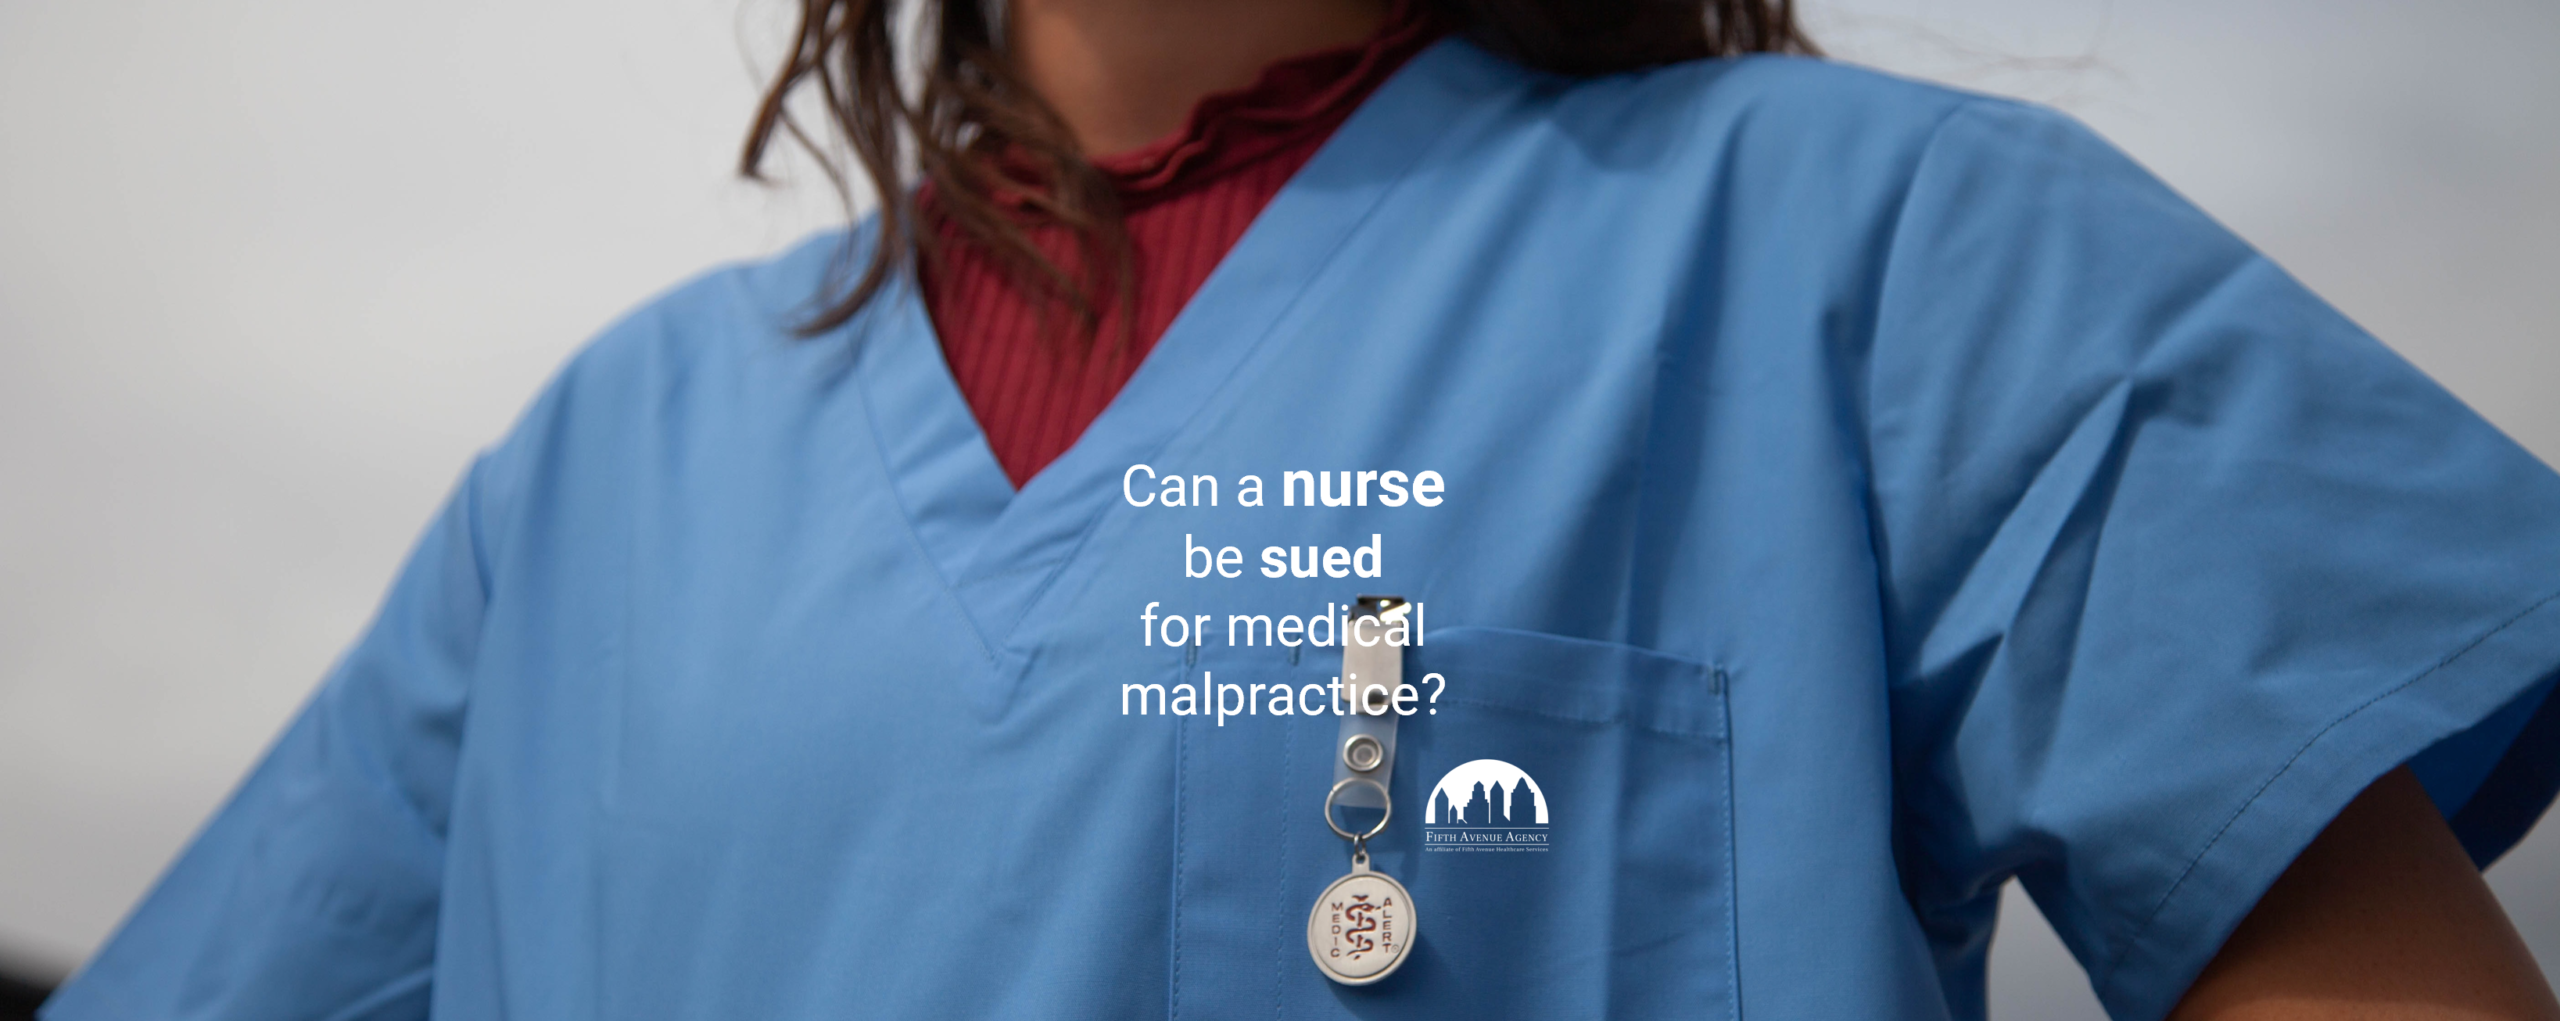 Can a nurse be sued for medical malpractice?